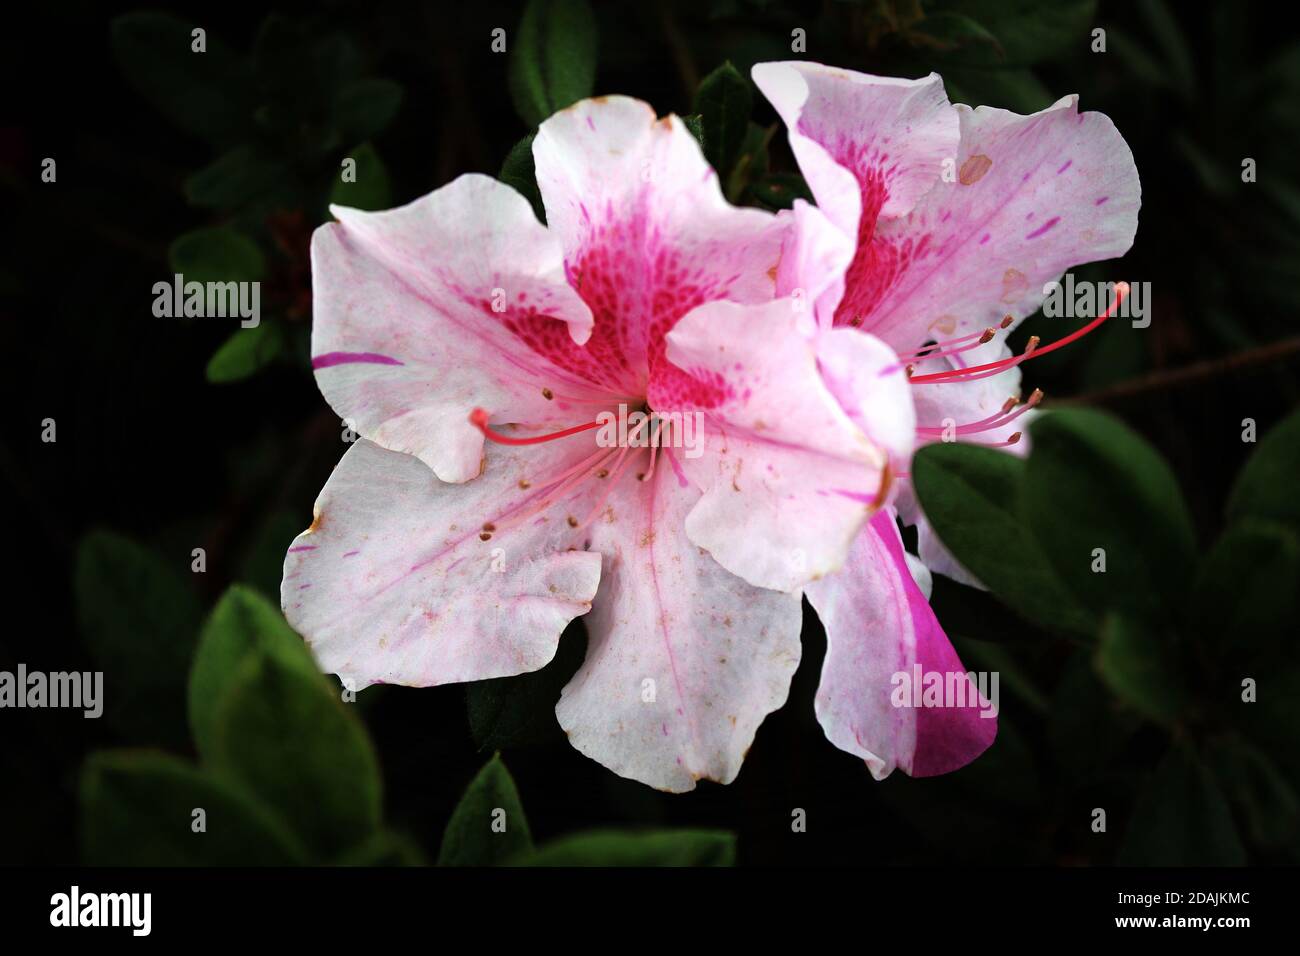 This pair of white and pink azaleas stands out against their soft dark blurred background of green leaves. Stock Photo